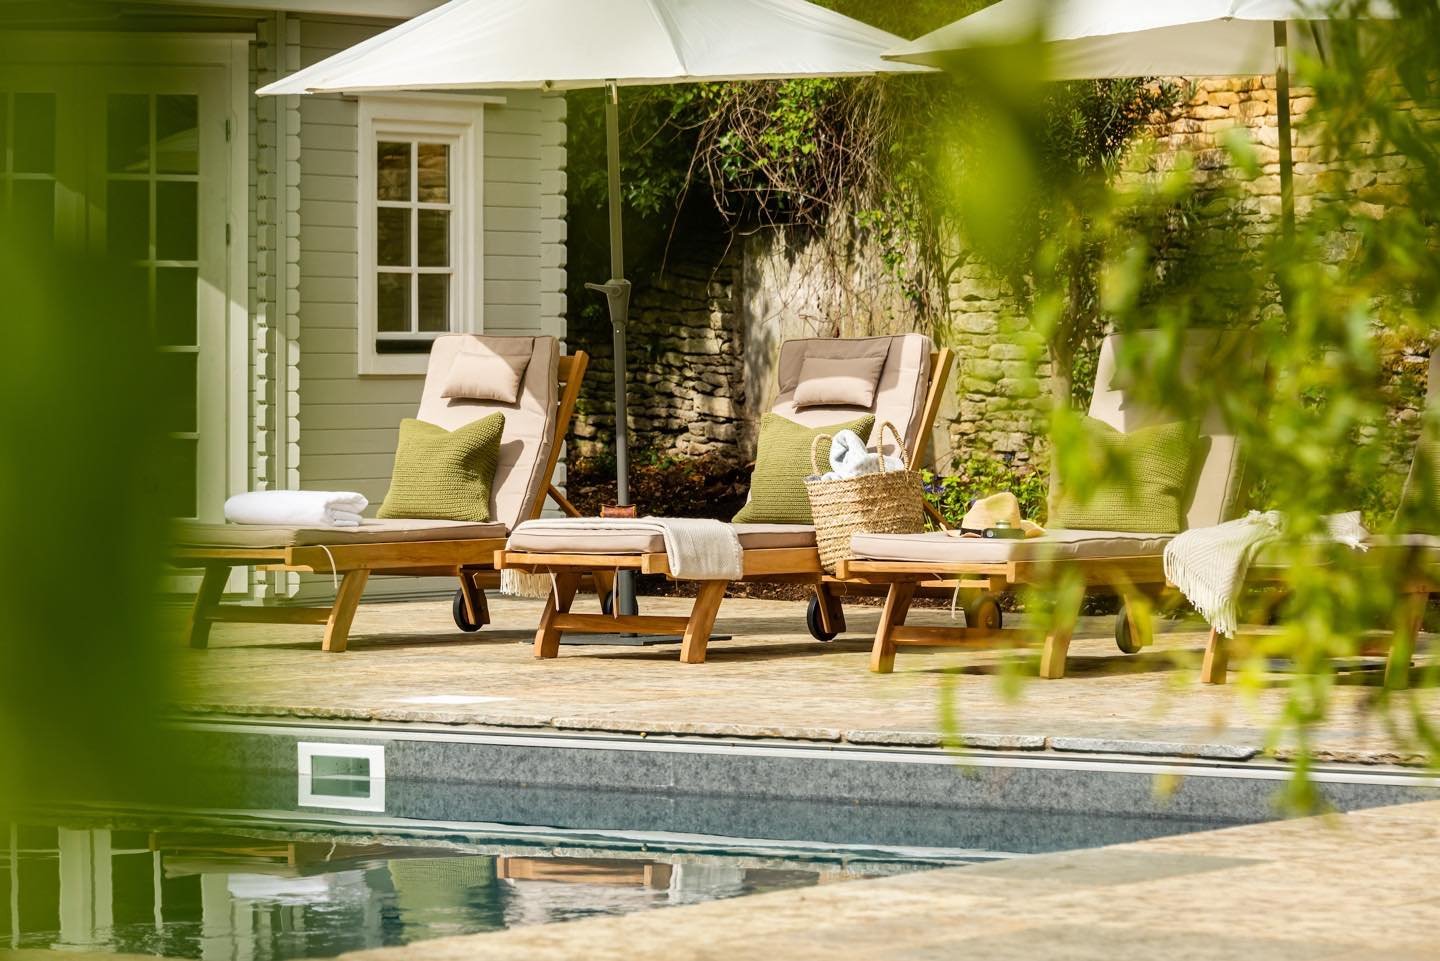 Summer vibes at The Lodge. Sit back and relax next to our cobalt blue heated swimming pool and take in the beautiful surrounding countryside.